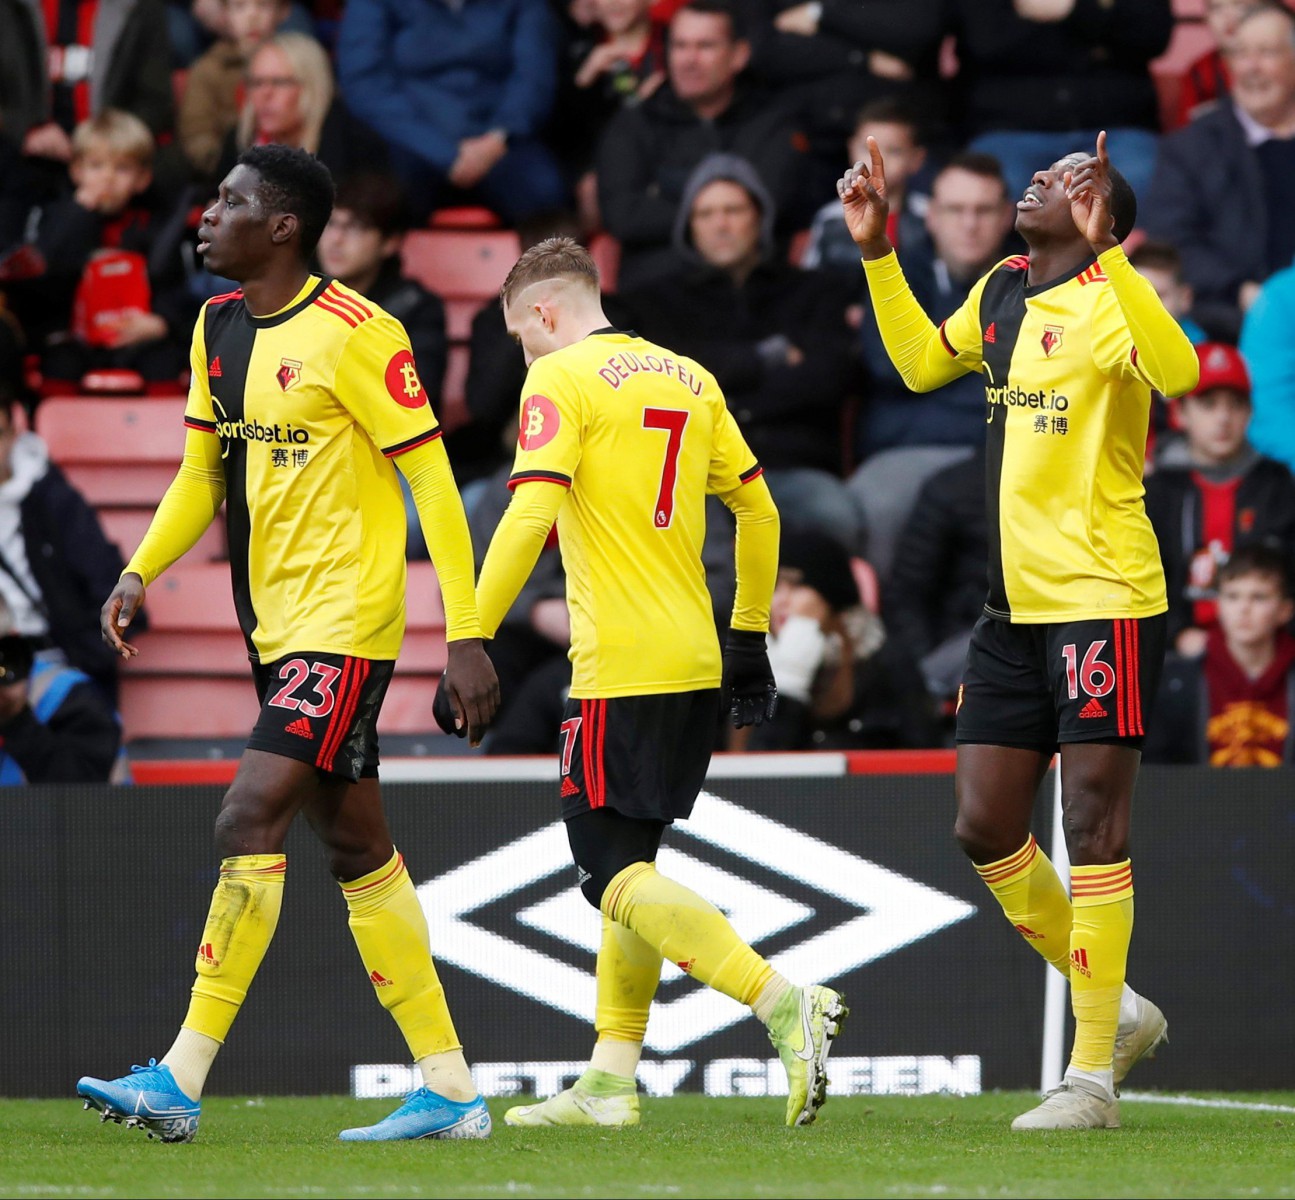 Things are looking up for Abdoulaye Doucoure after his pivotal role in lifting Watford out of the drop zone under new boss Nigel Pearson